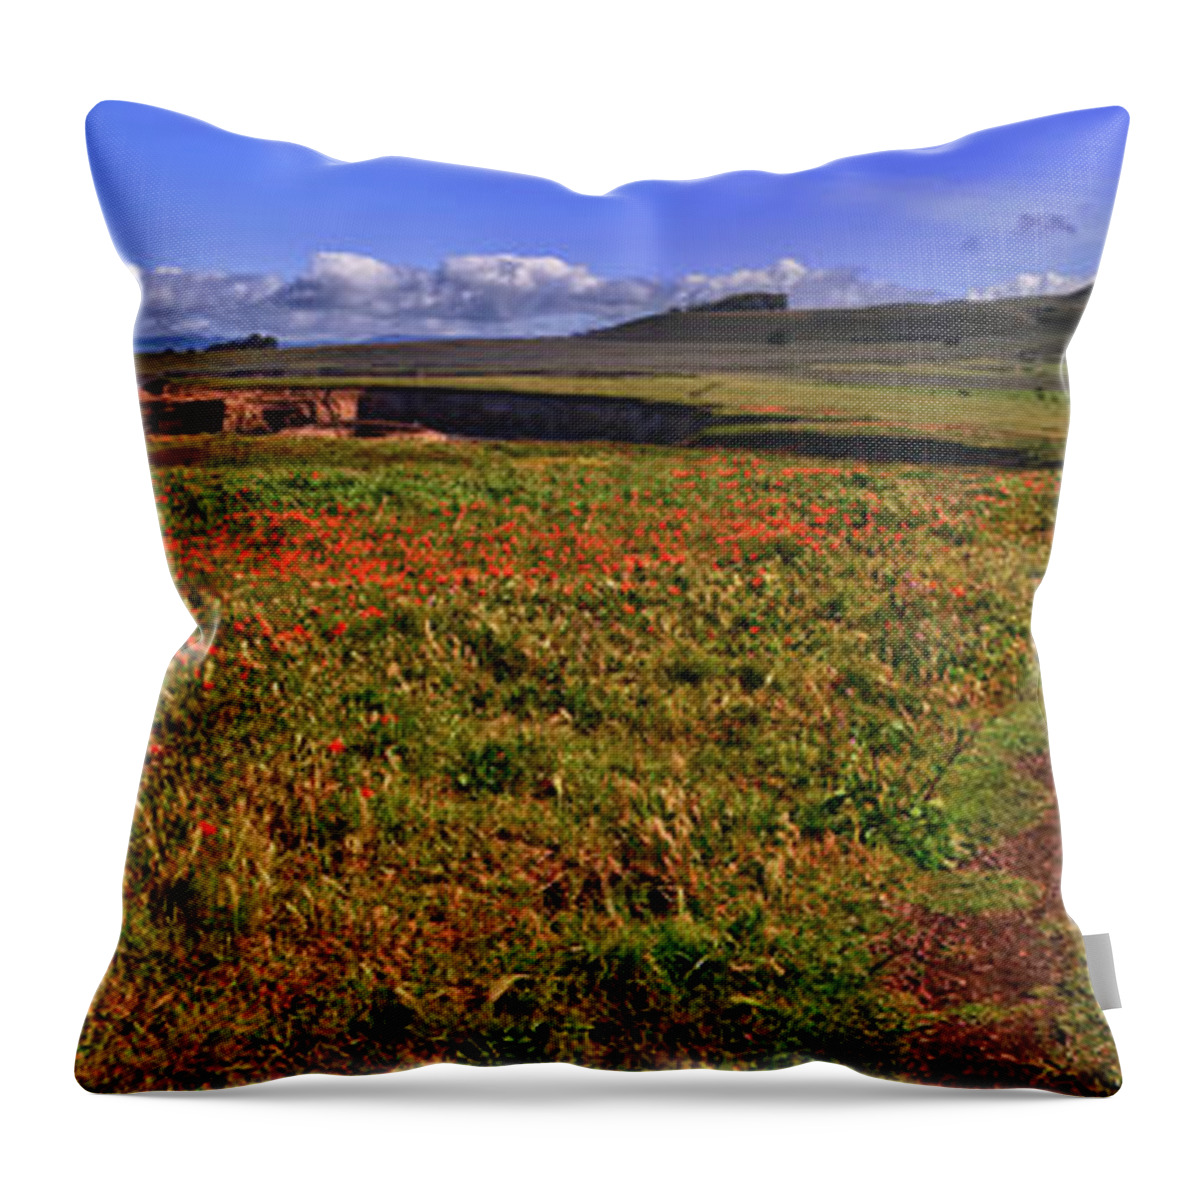 Buchon Throw Pillow featuring the photograph Buchon Trail by Beth Sargent